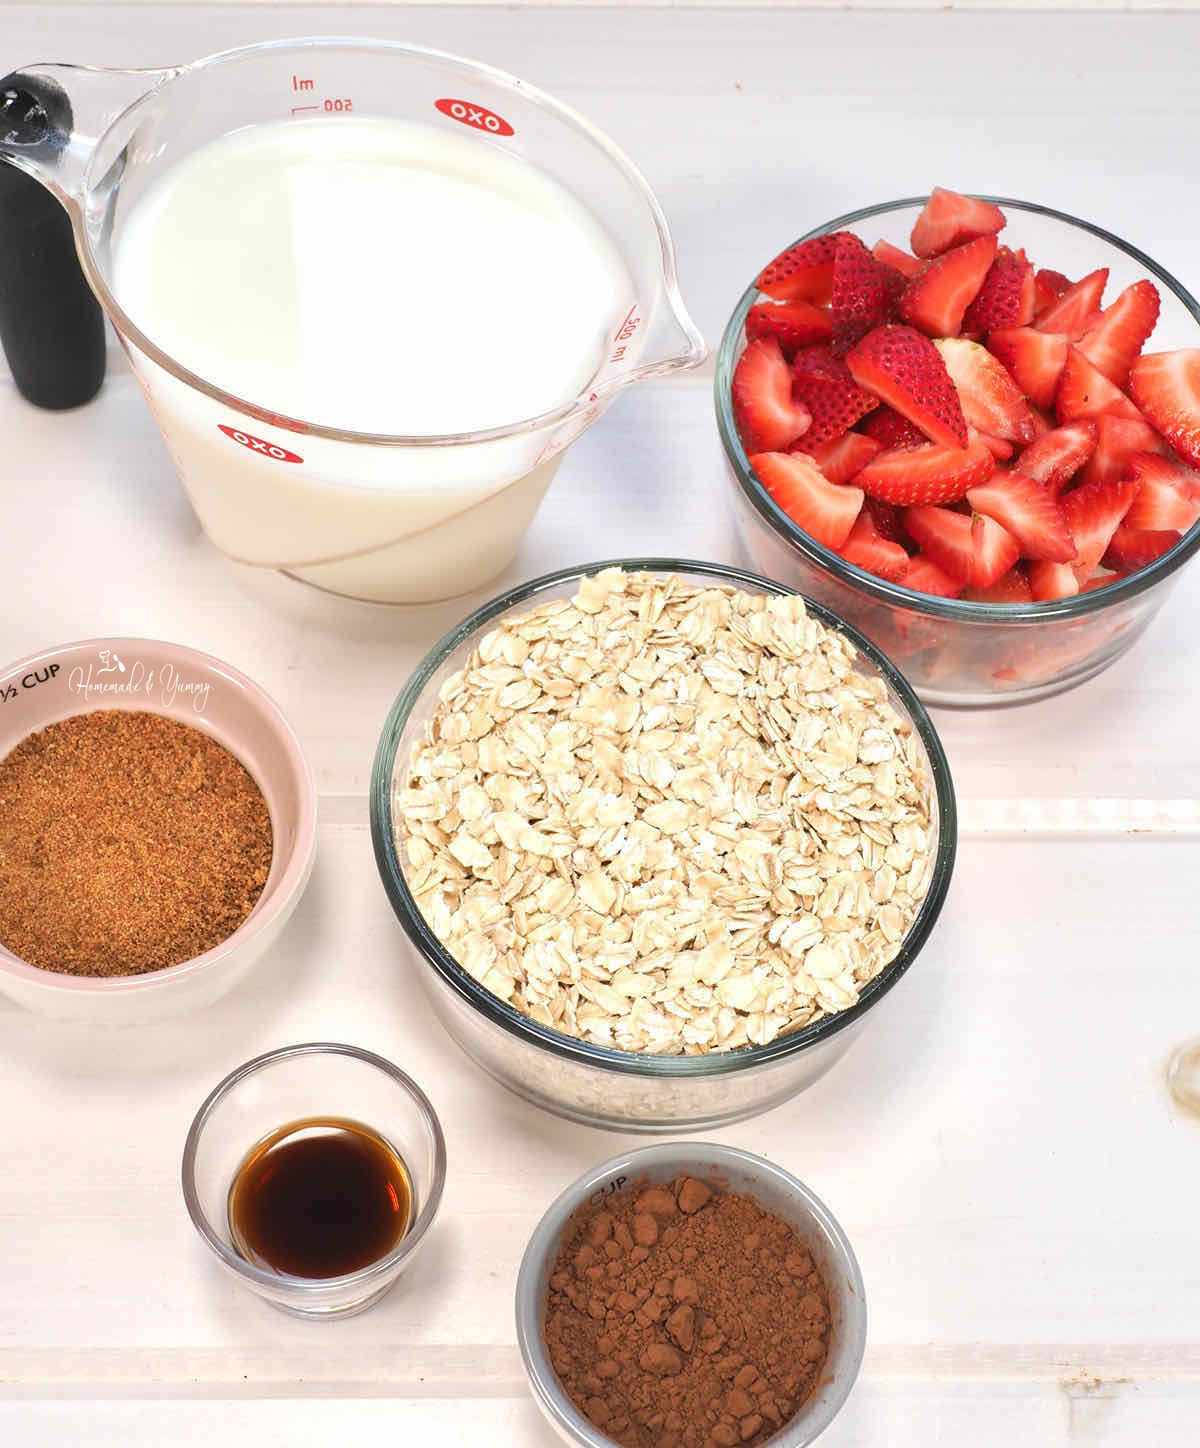 Ingredients needed to make chocolate and strawberry baked oats.